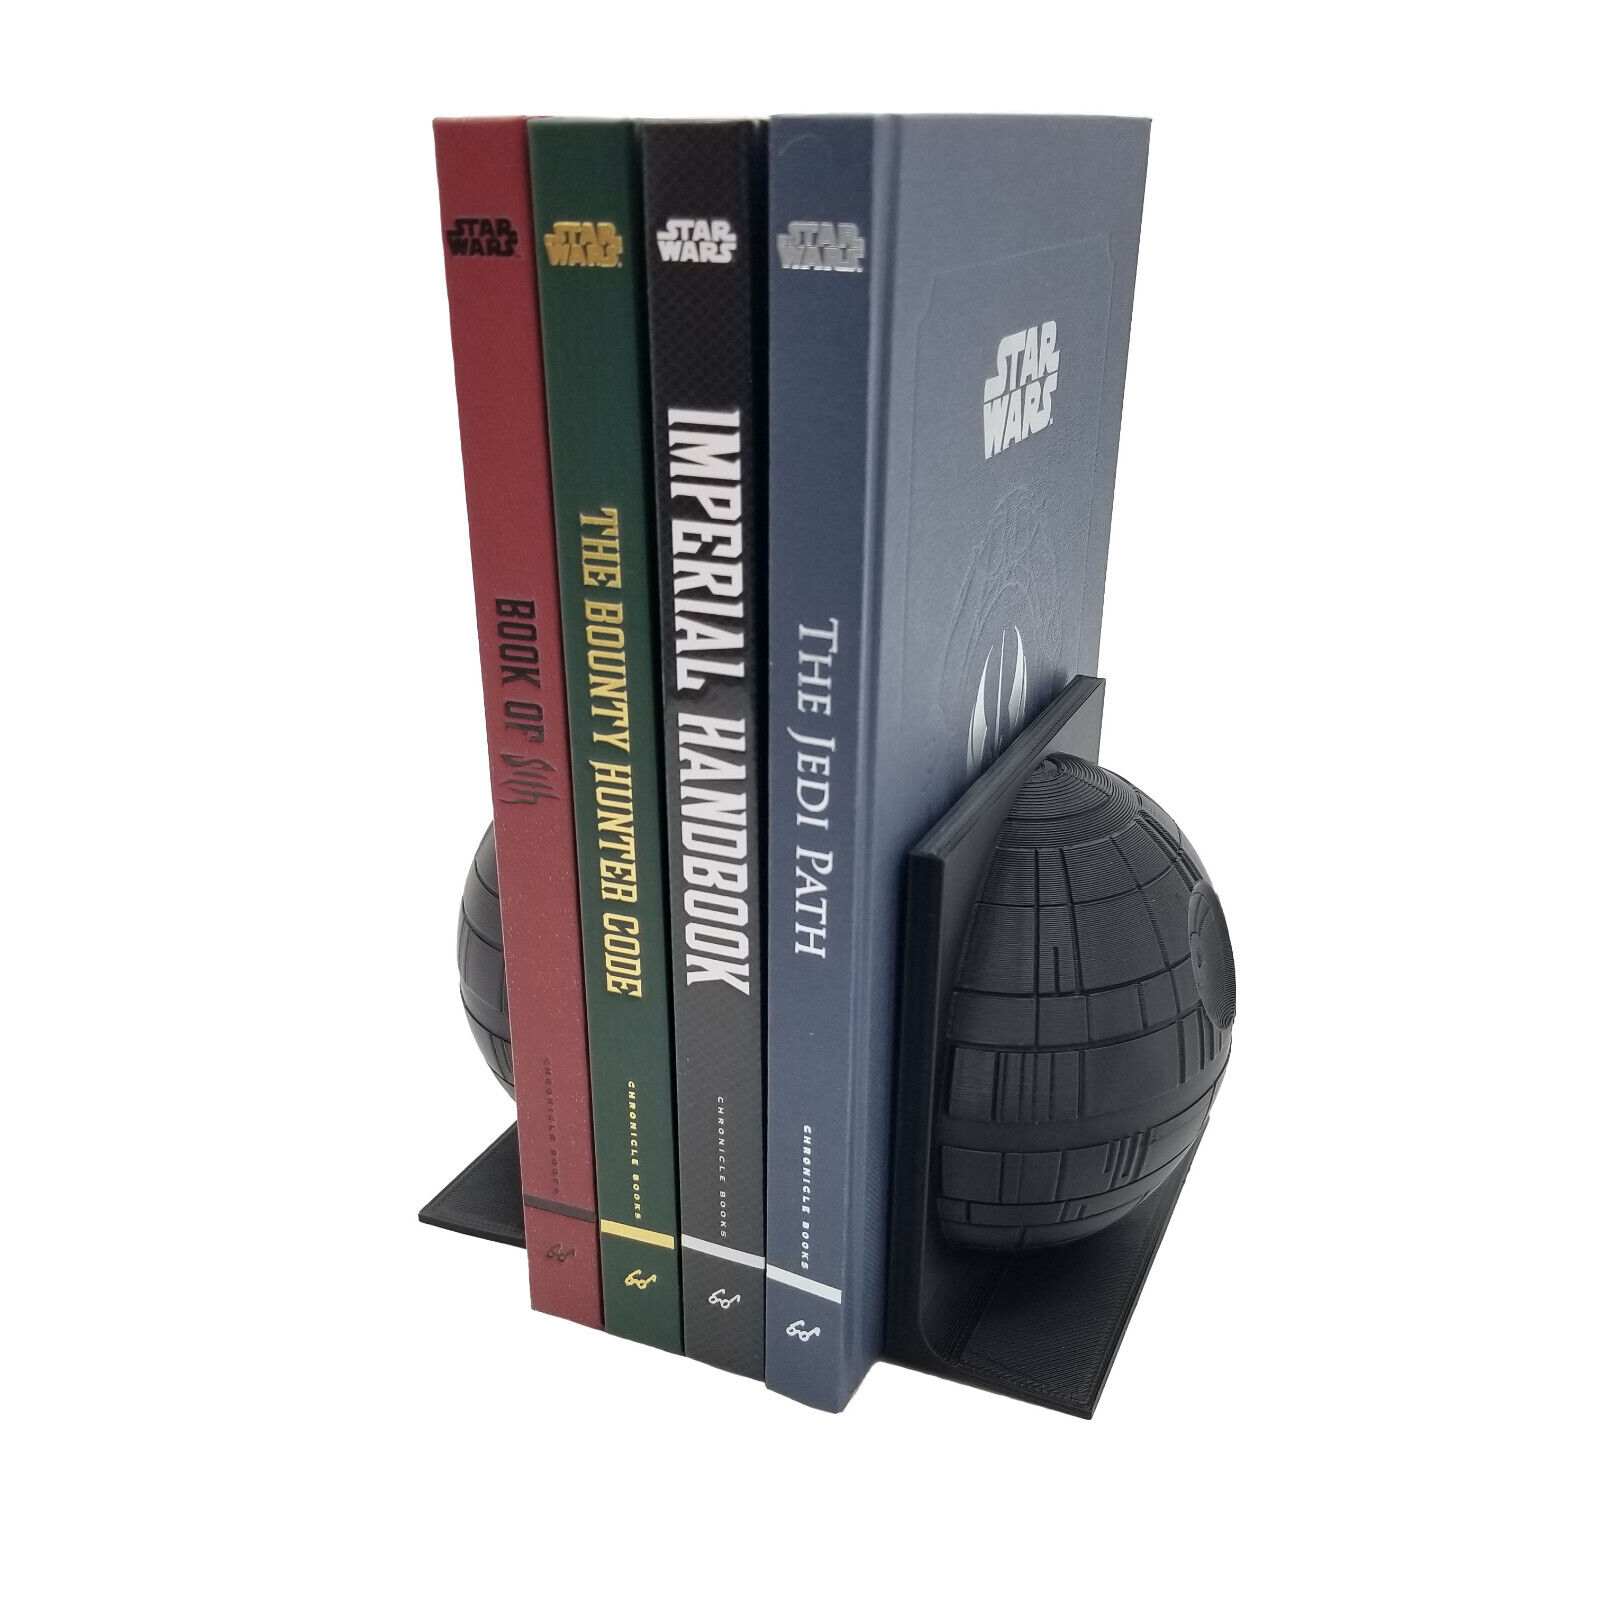 3D Printed Death Star Bookends